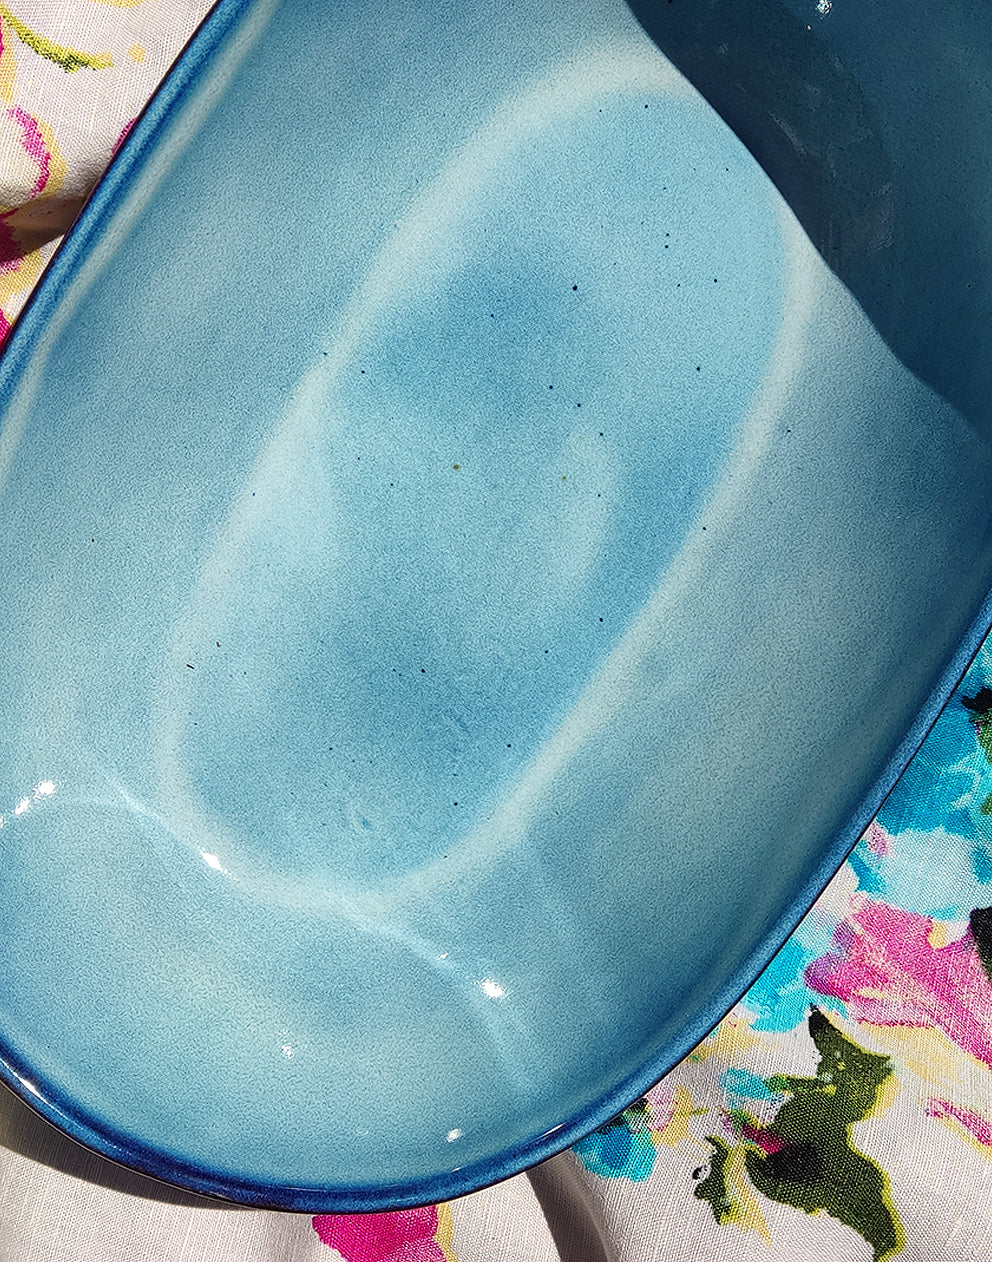 Large Natural Stoneware Serving Dish in Blue